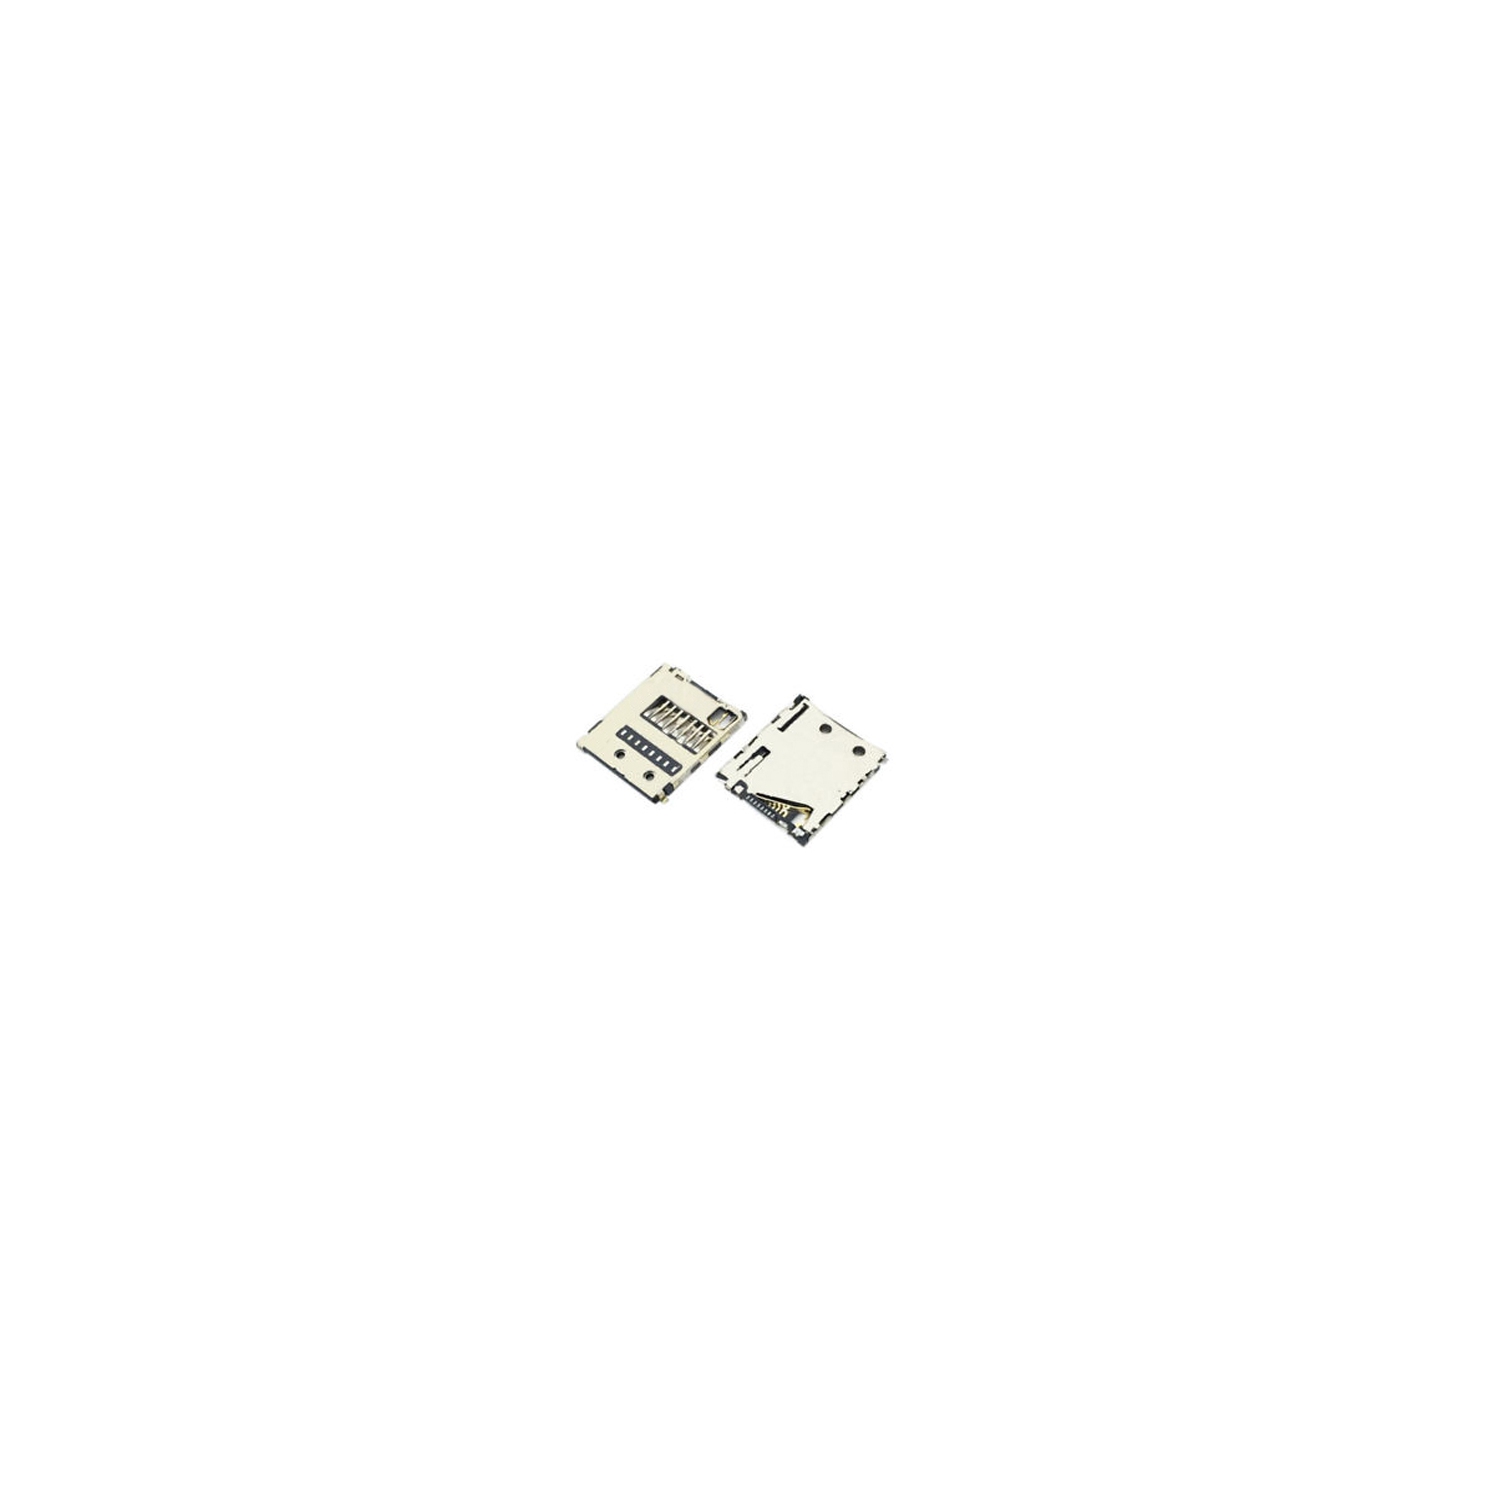 Sony Xperia Z3 Compact Micro TF SD Card Reader Slot Tray Holder Replacement